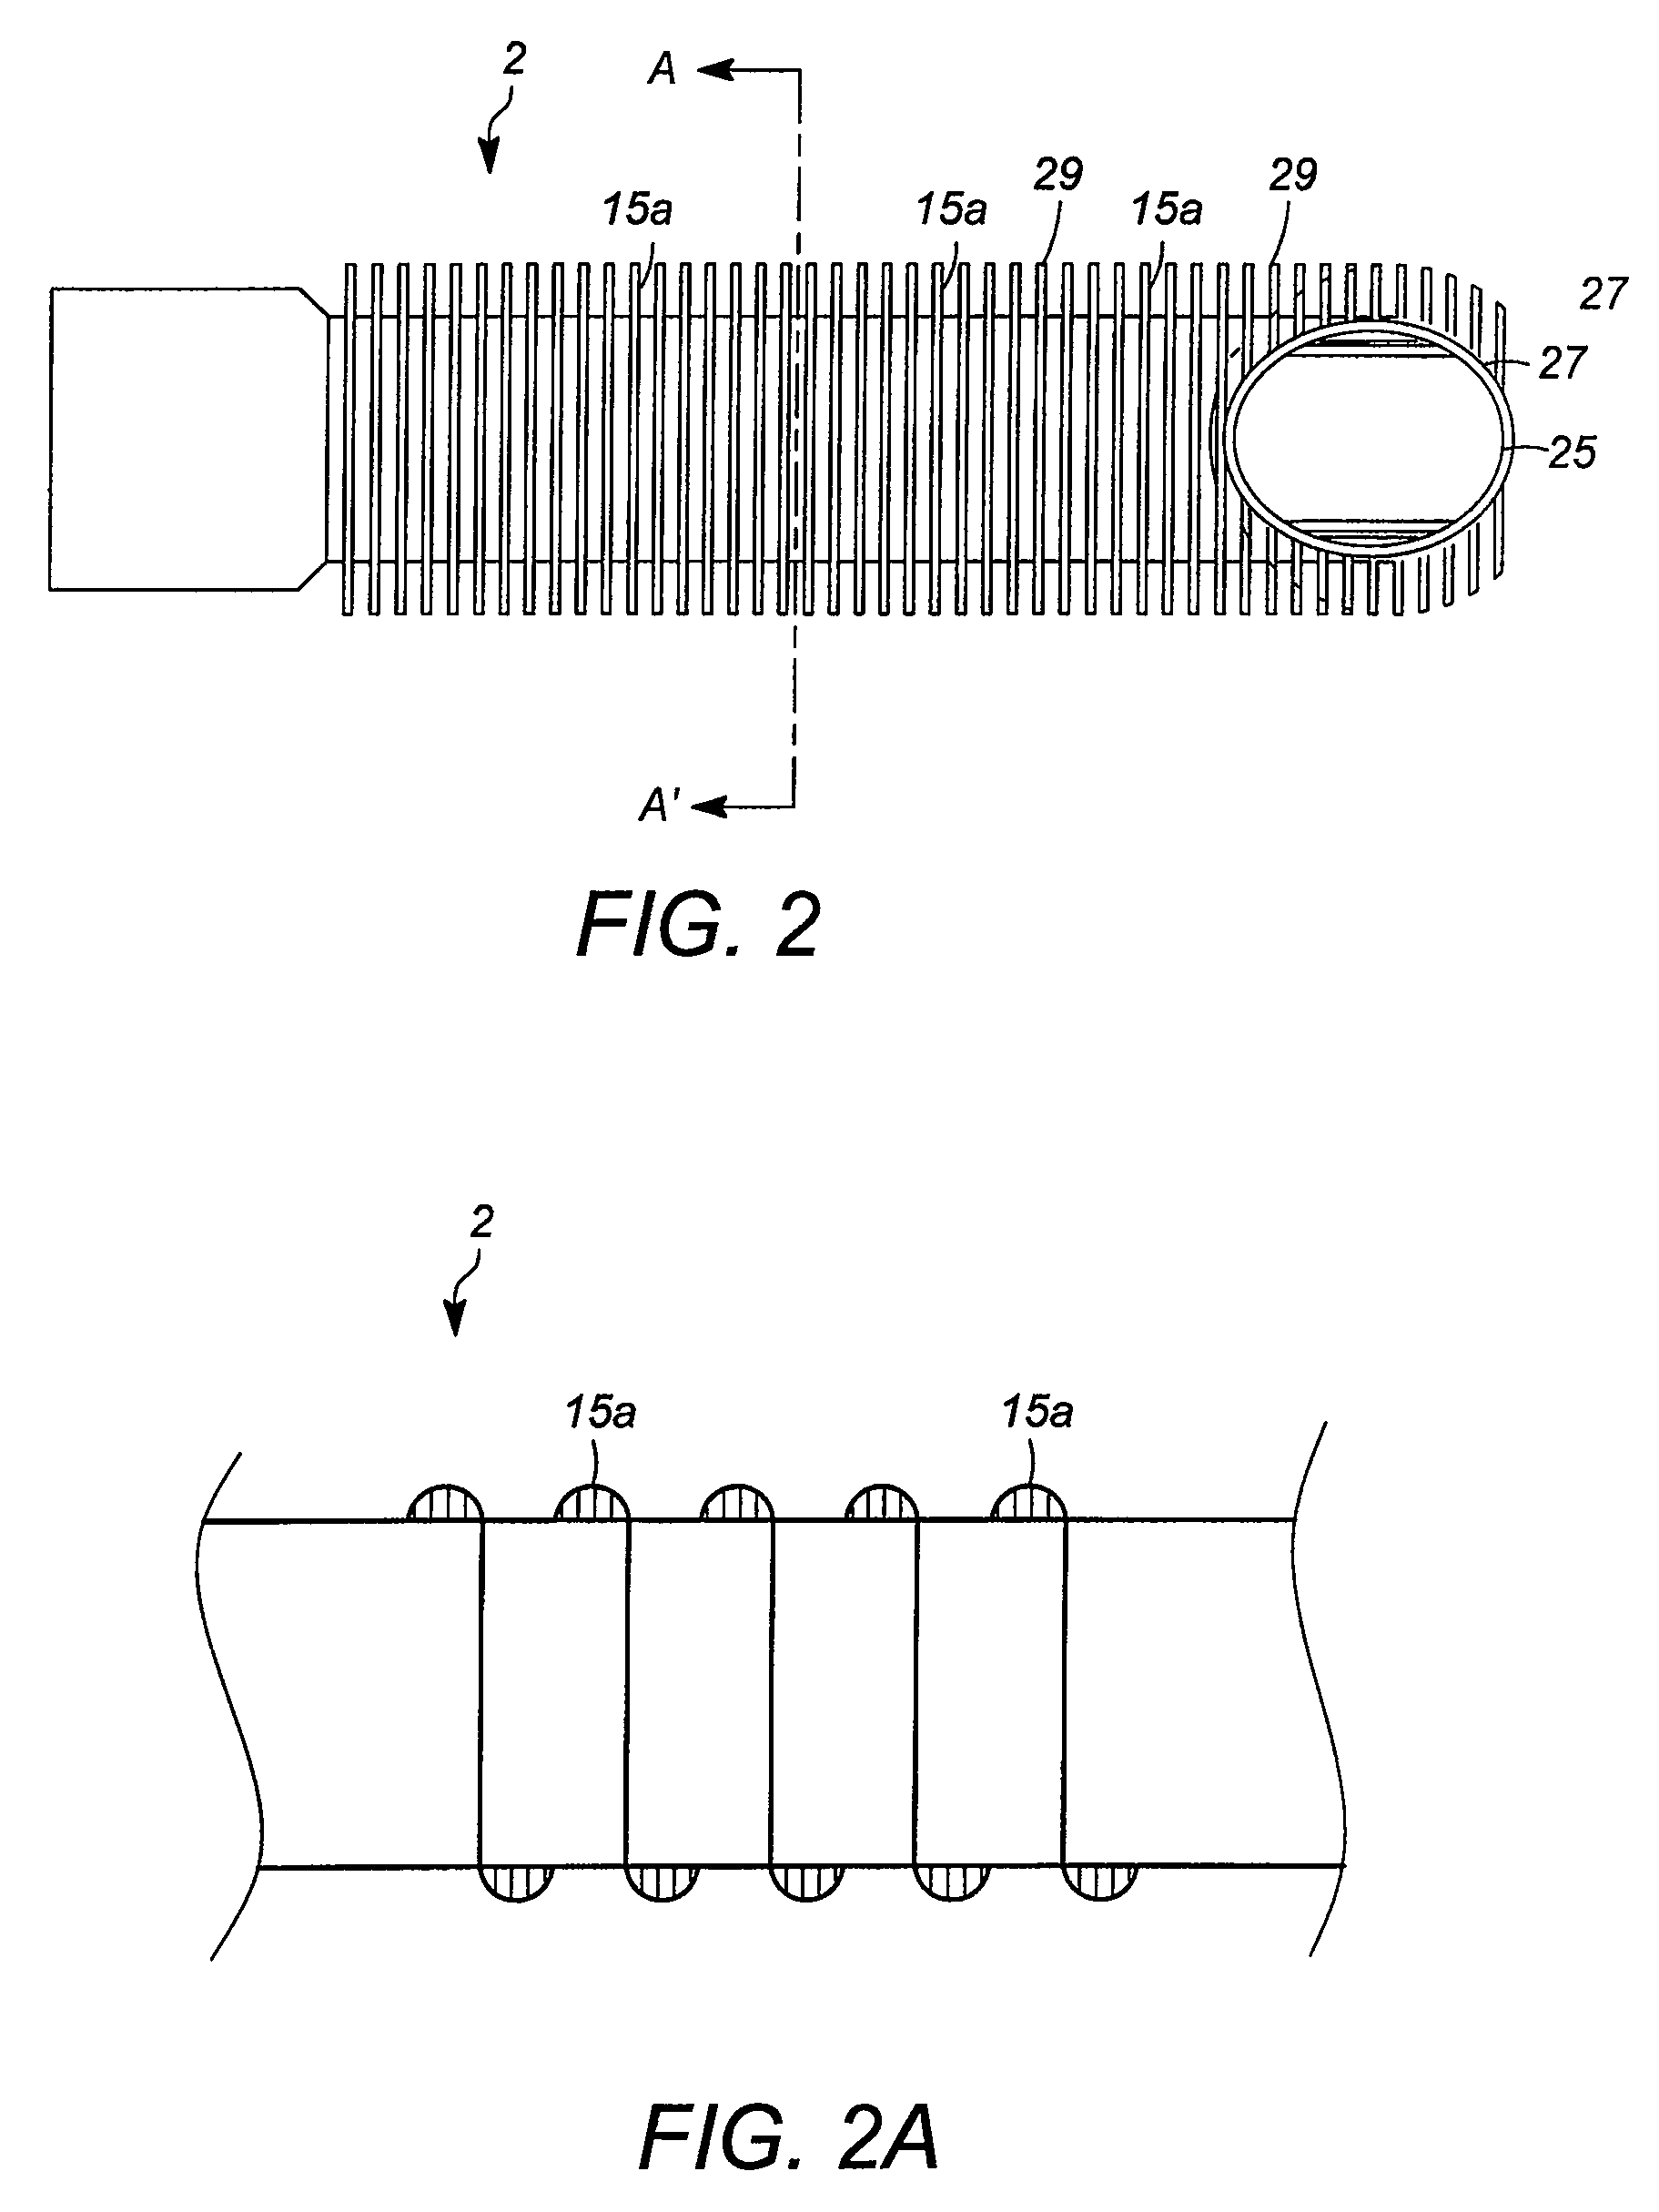 Tubular condensers having tubes with external enhancements